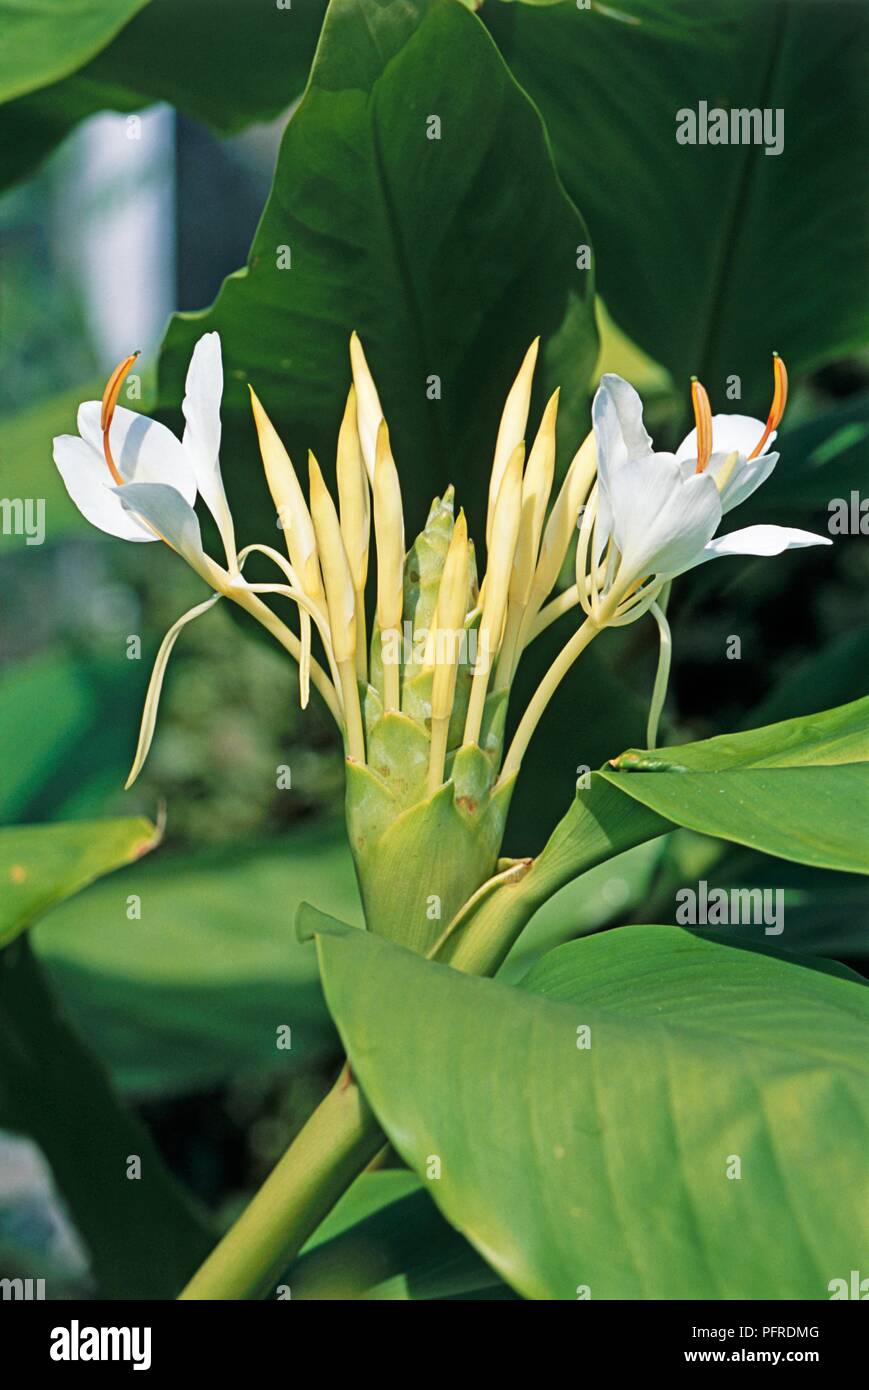 Hedychium Coronarium White Ginger Lily Flowers And Leaves Close Up Stock Photo Alamy